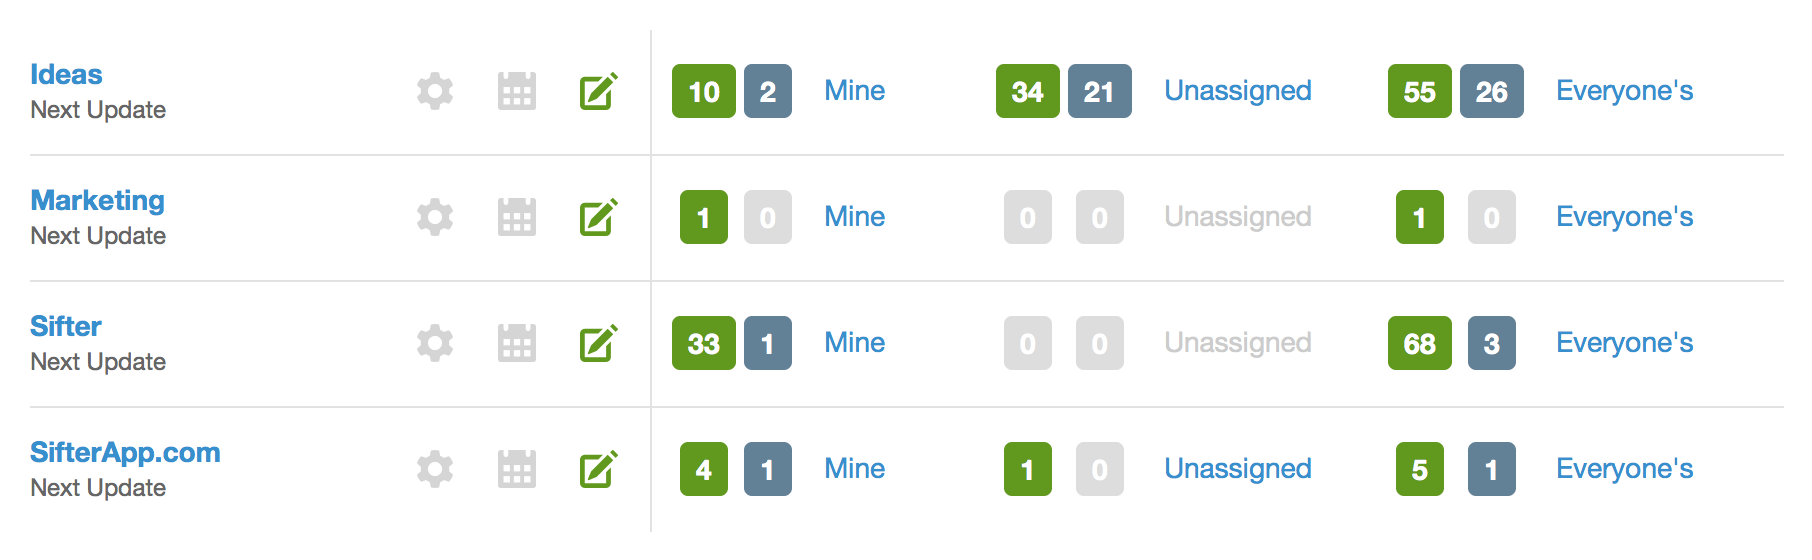 Each project is a row with numbers for each of the assignees: mine, unassigned, everyone's.